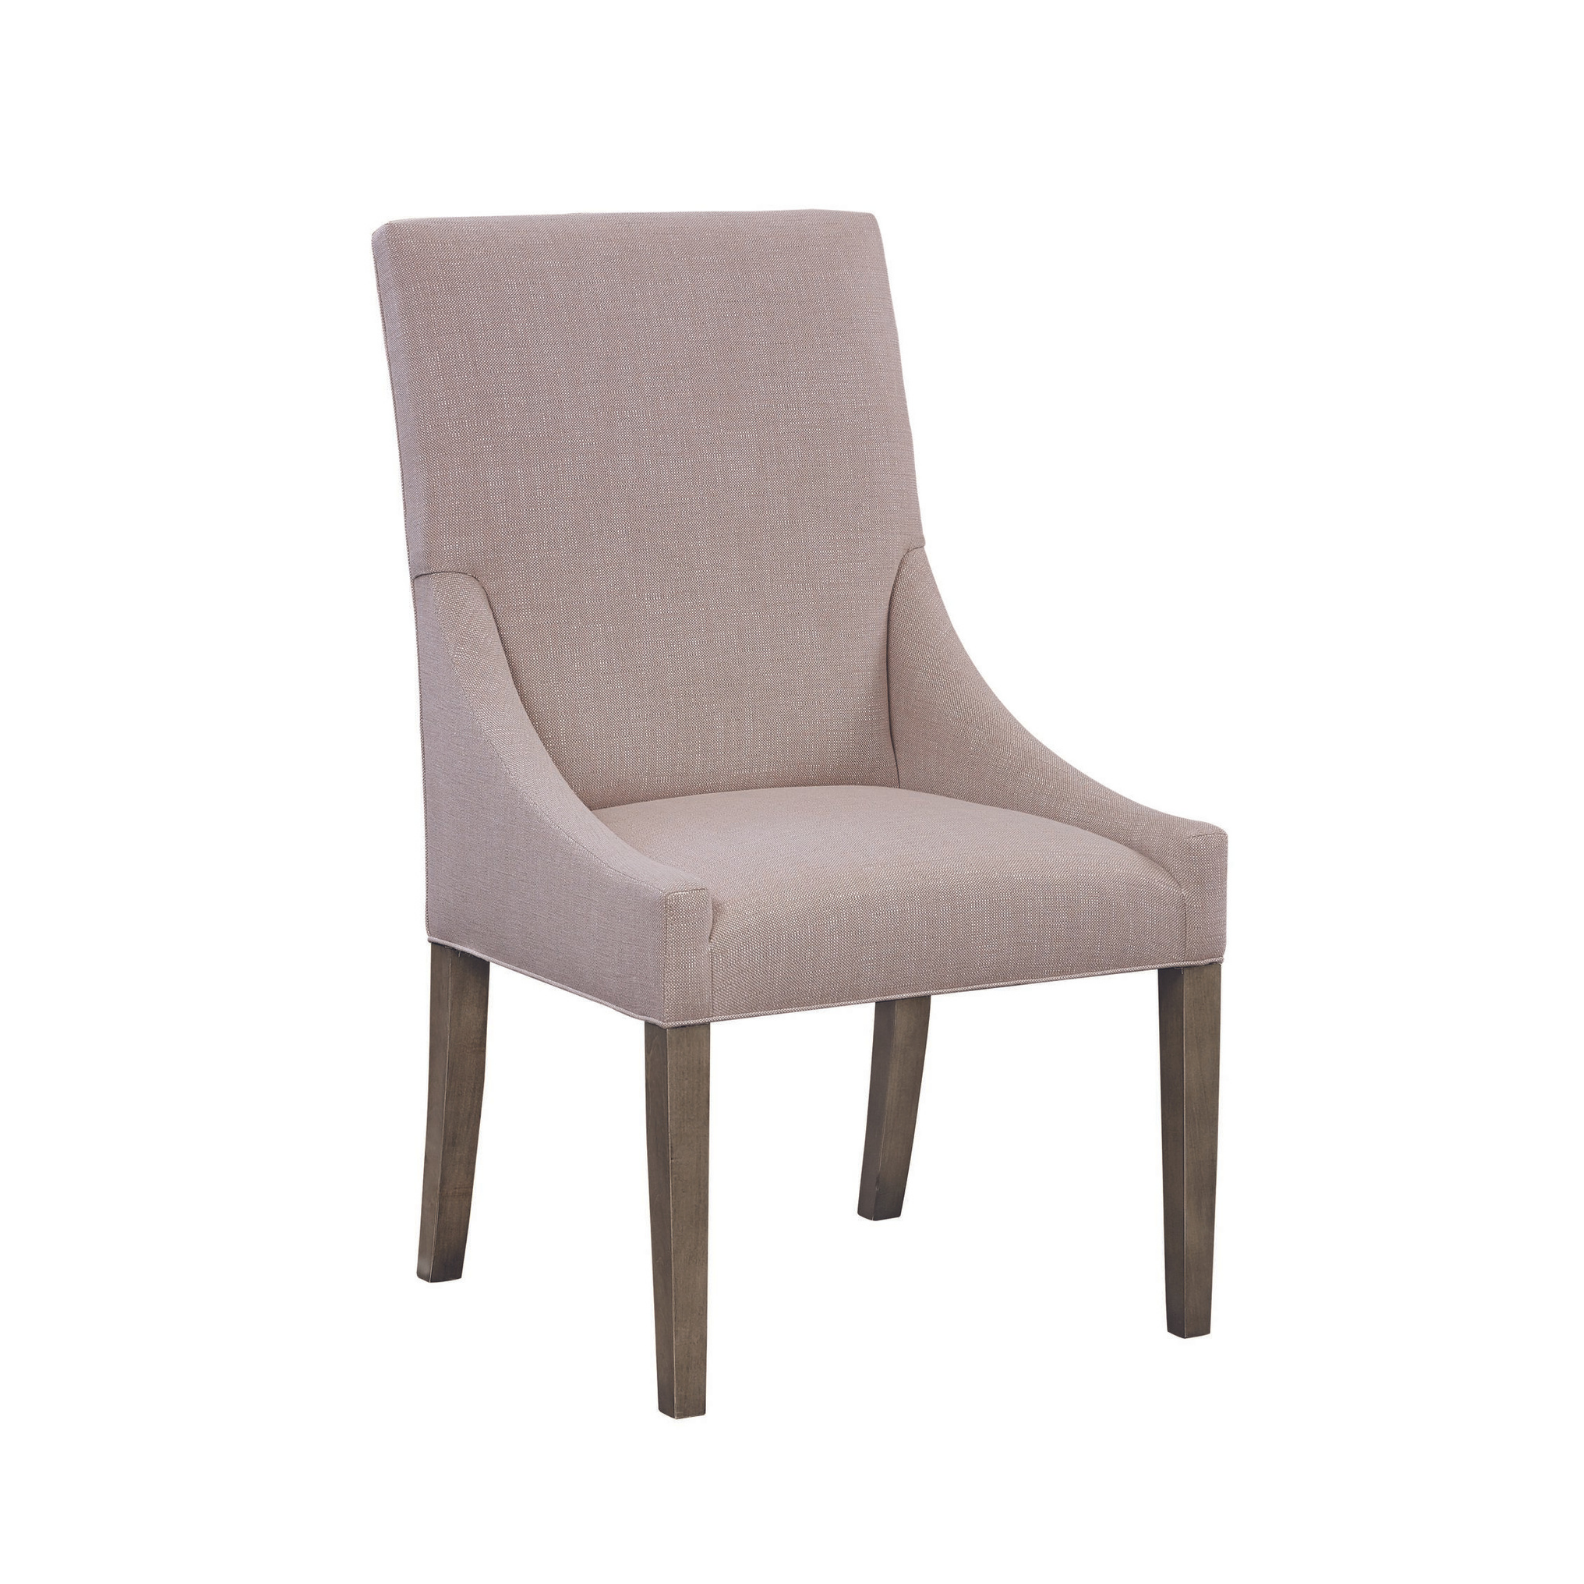 Alice Slope Arm Chair